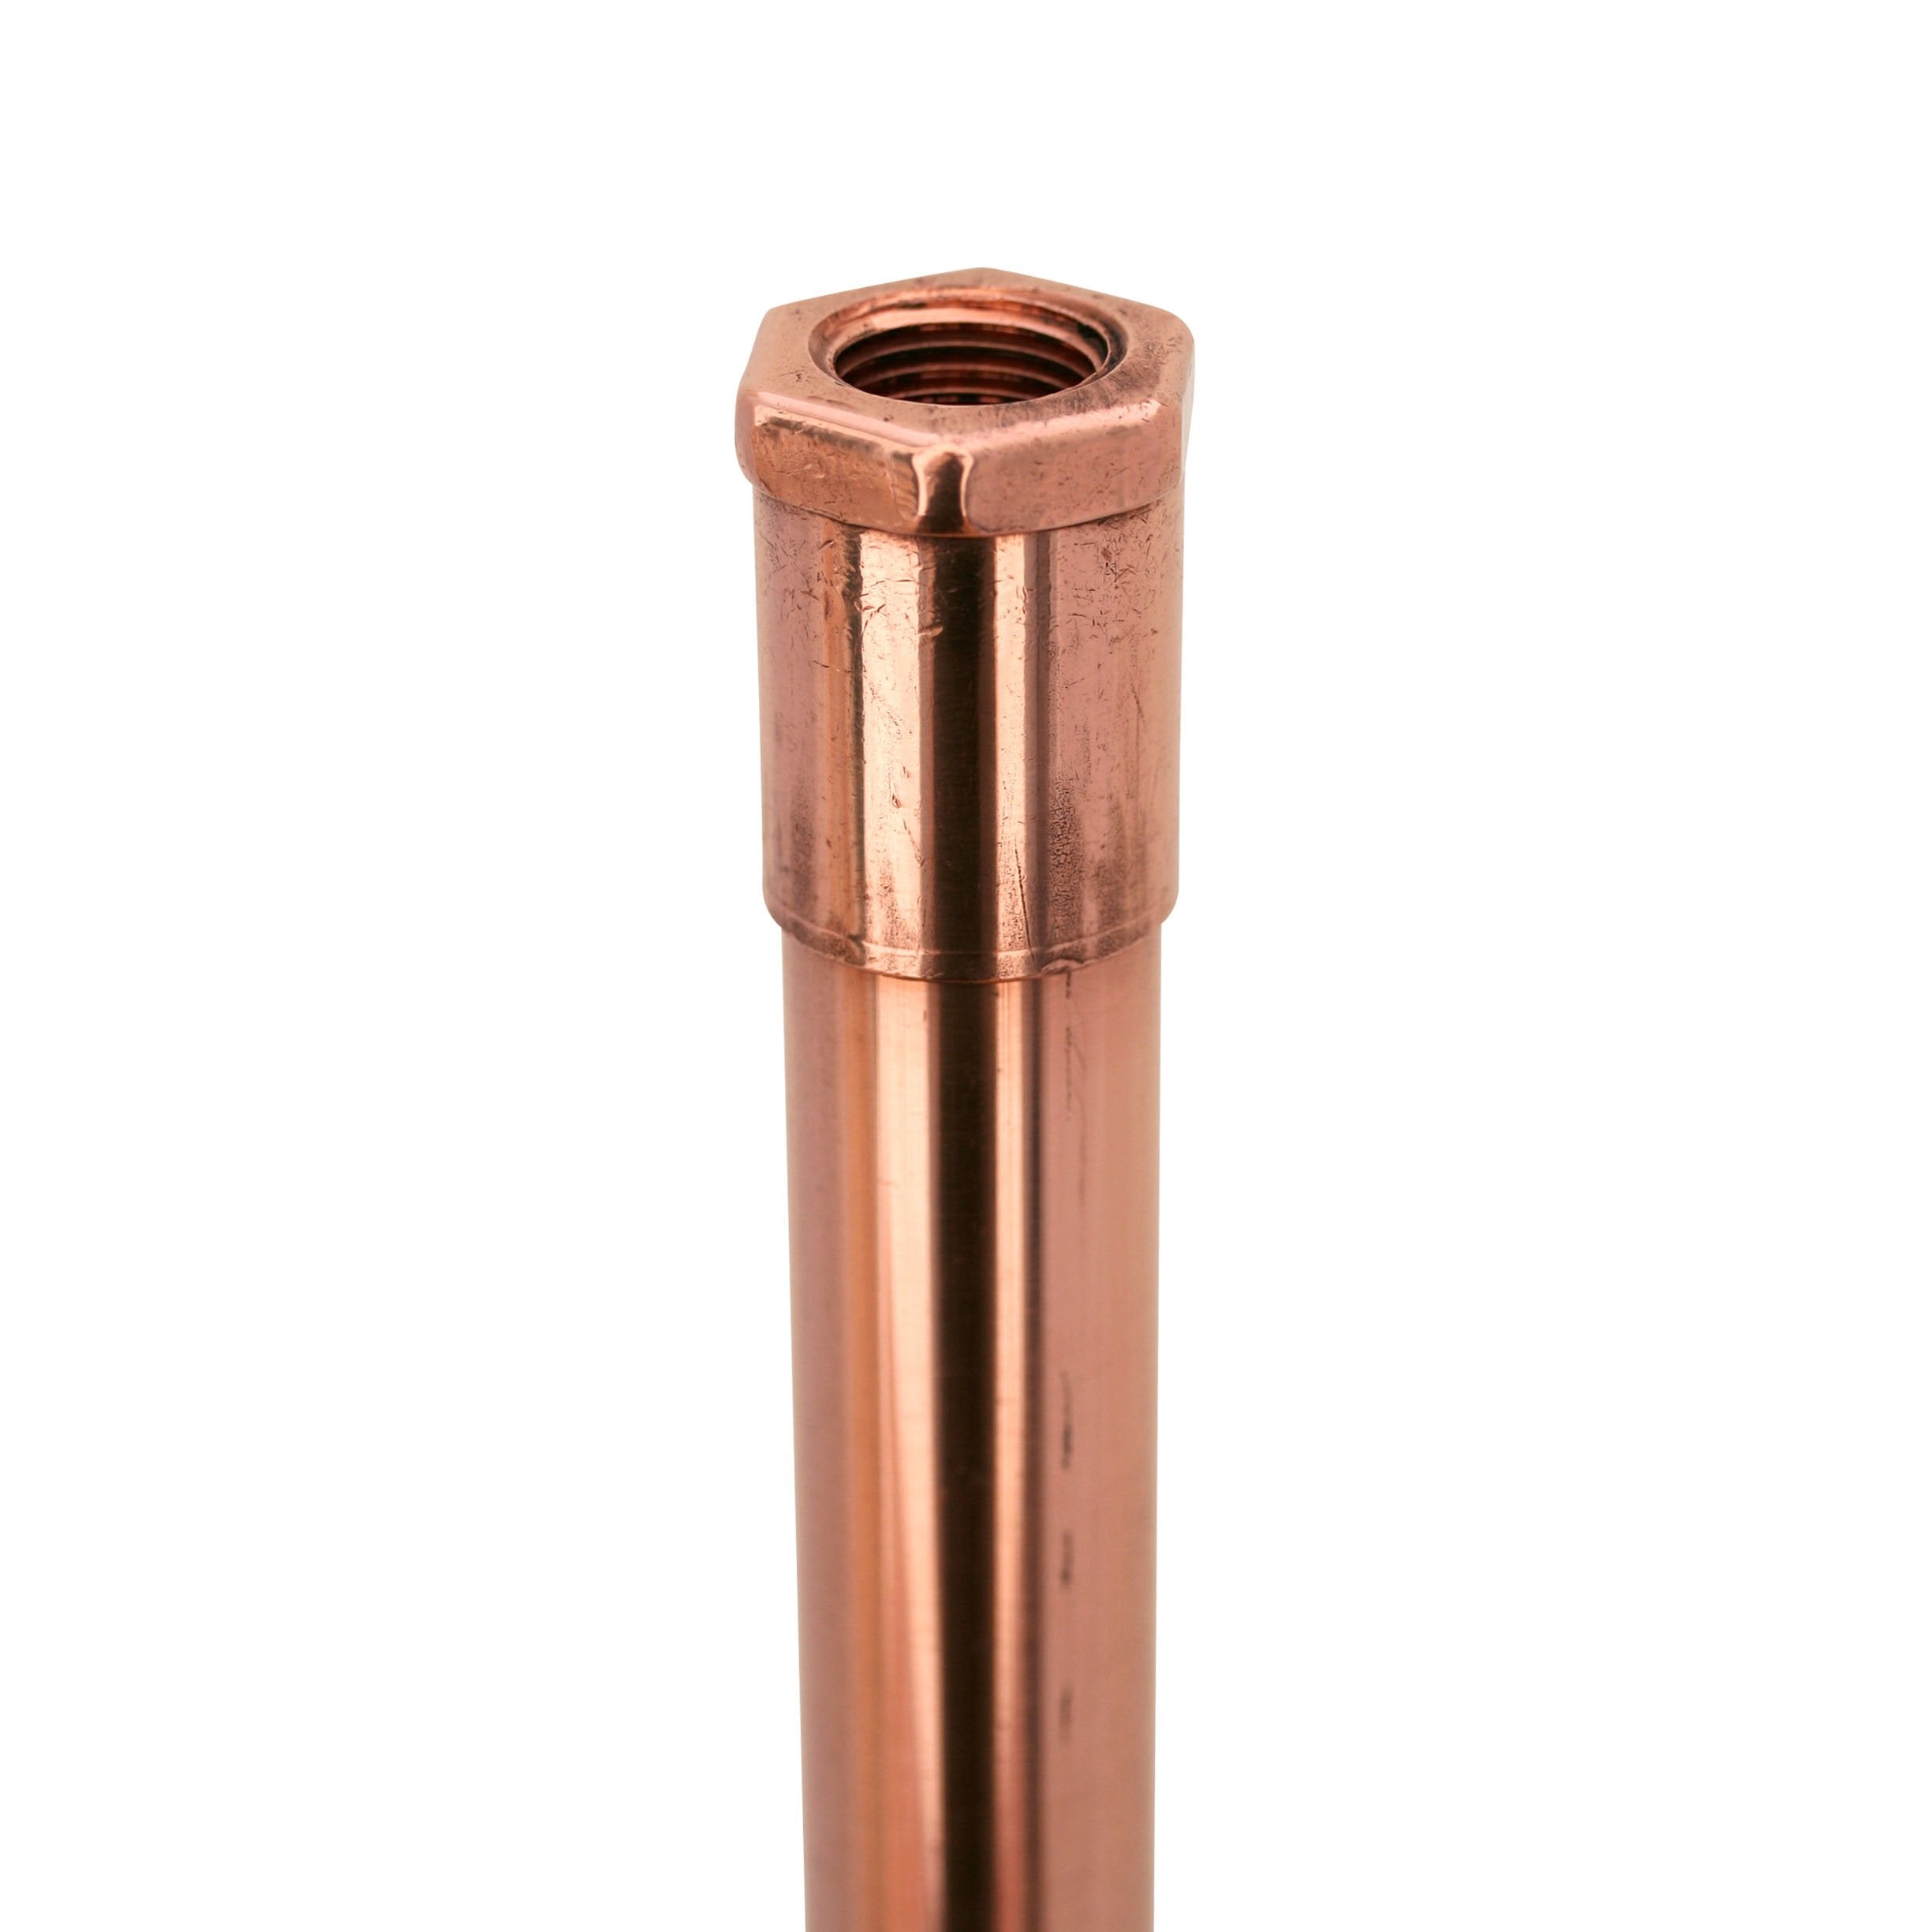 CopperMoon Custom Copper Stem ONLY for CM.15 path light